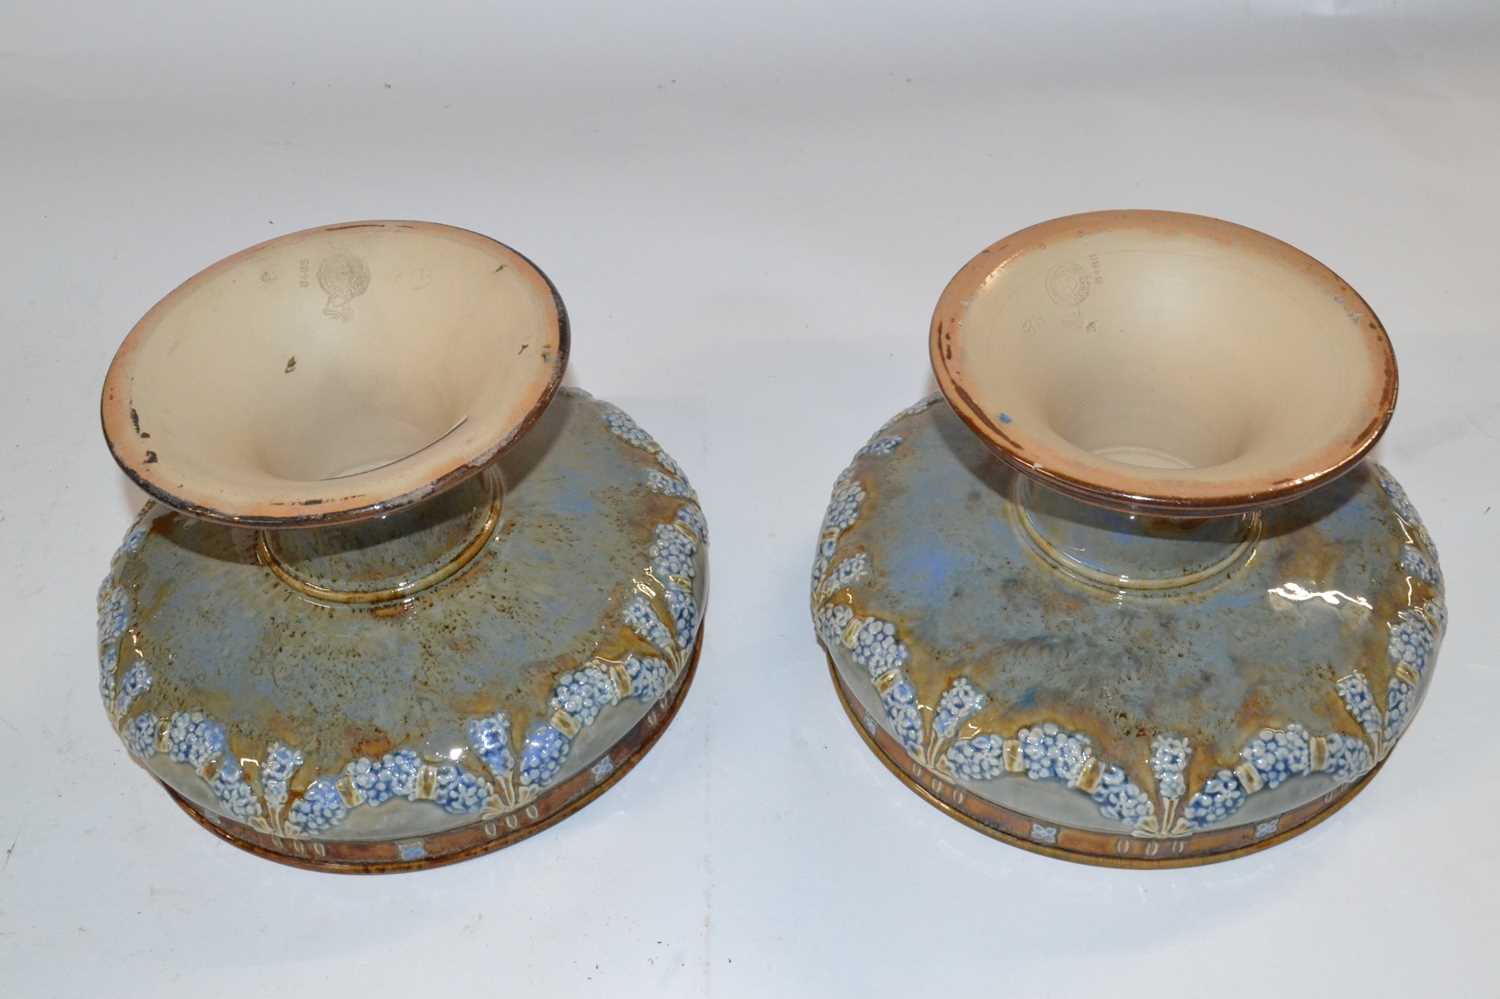 A pair of Royal Doulton tazzae, both with applied floral design of swags, 19cm diameters - Image 4 of 4